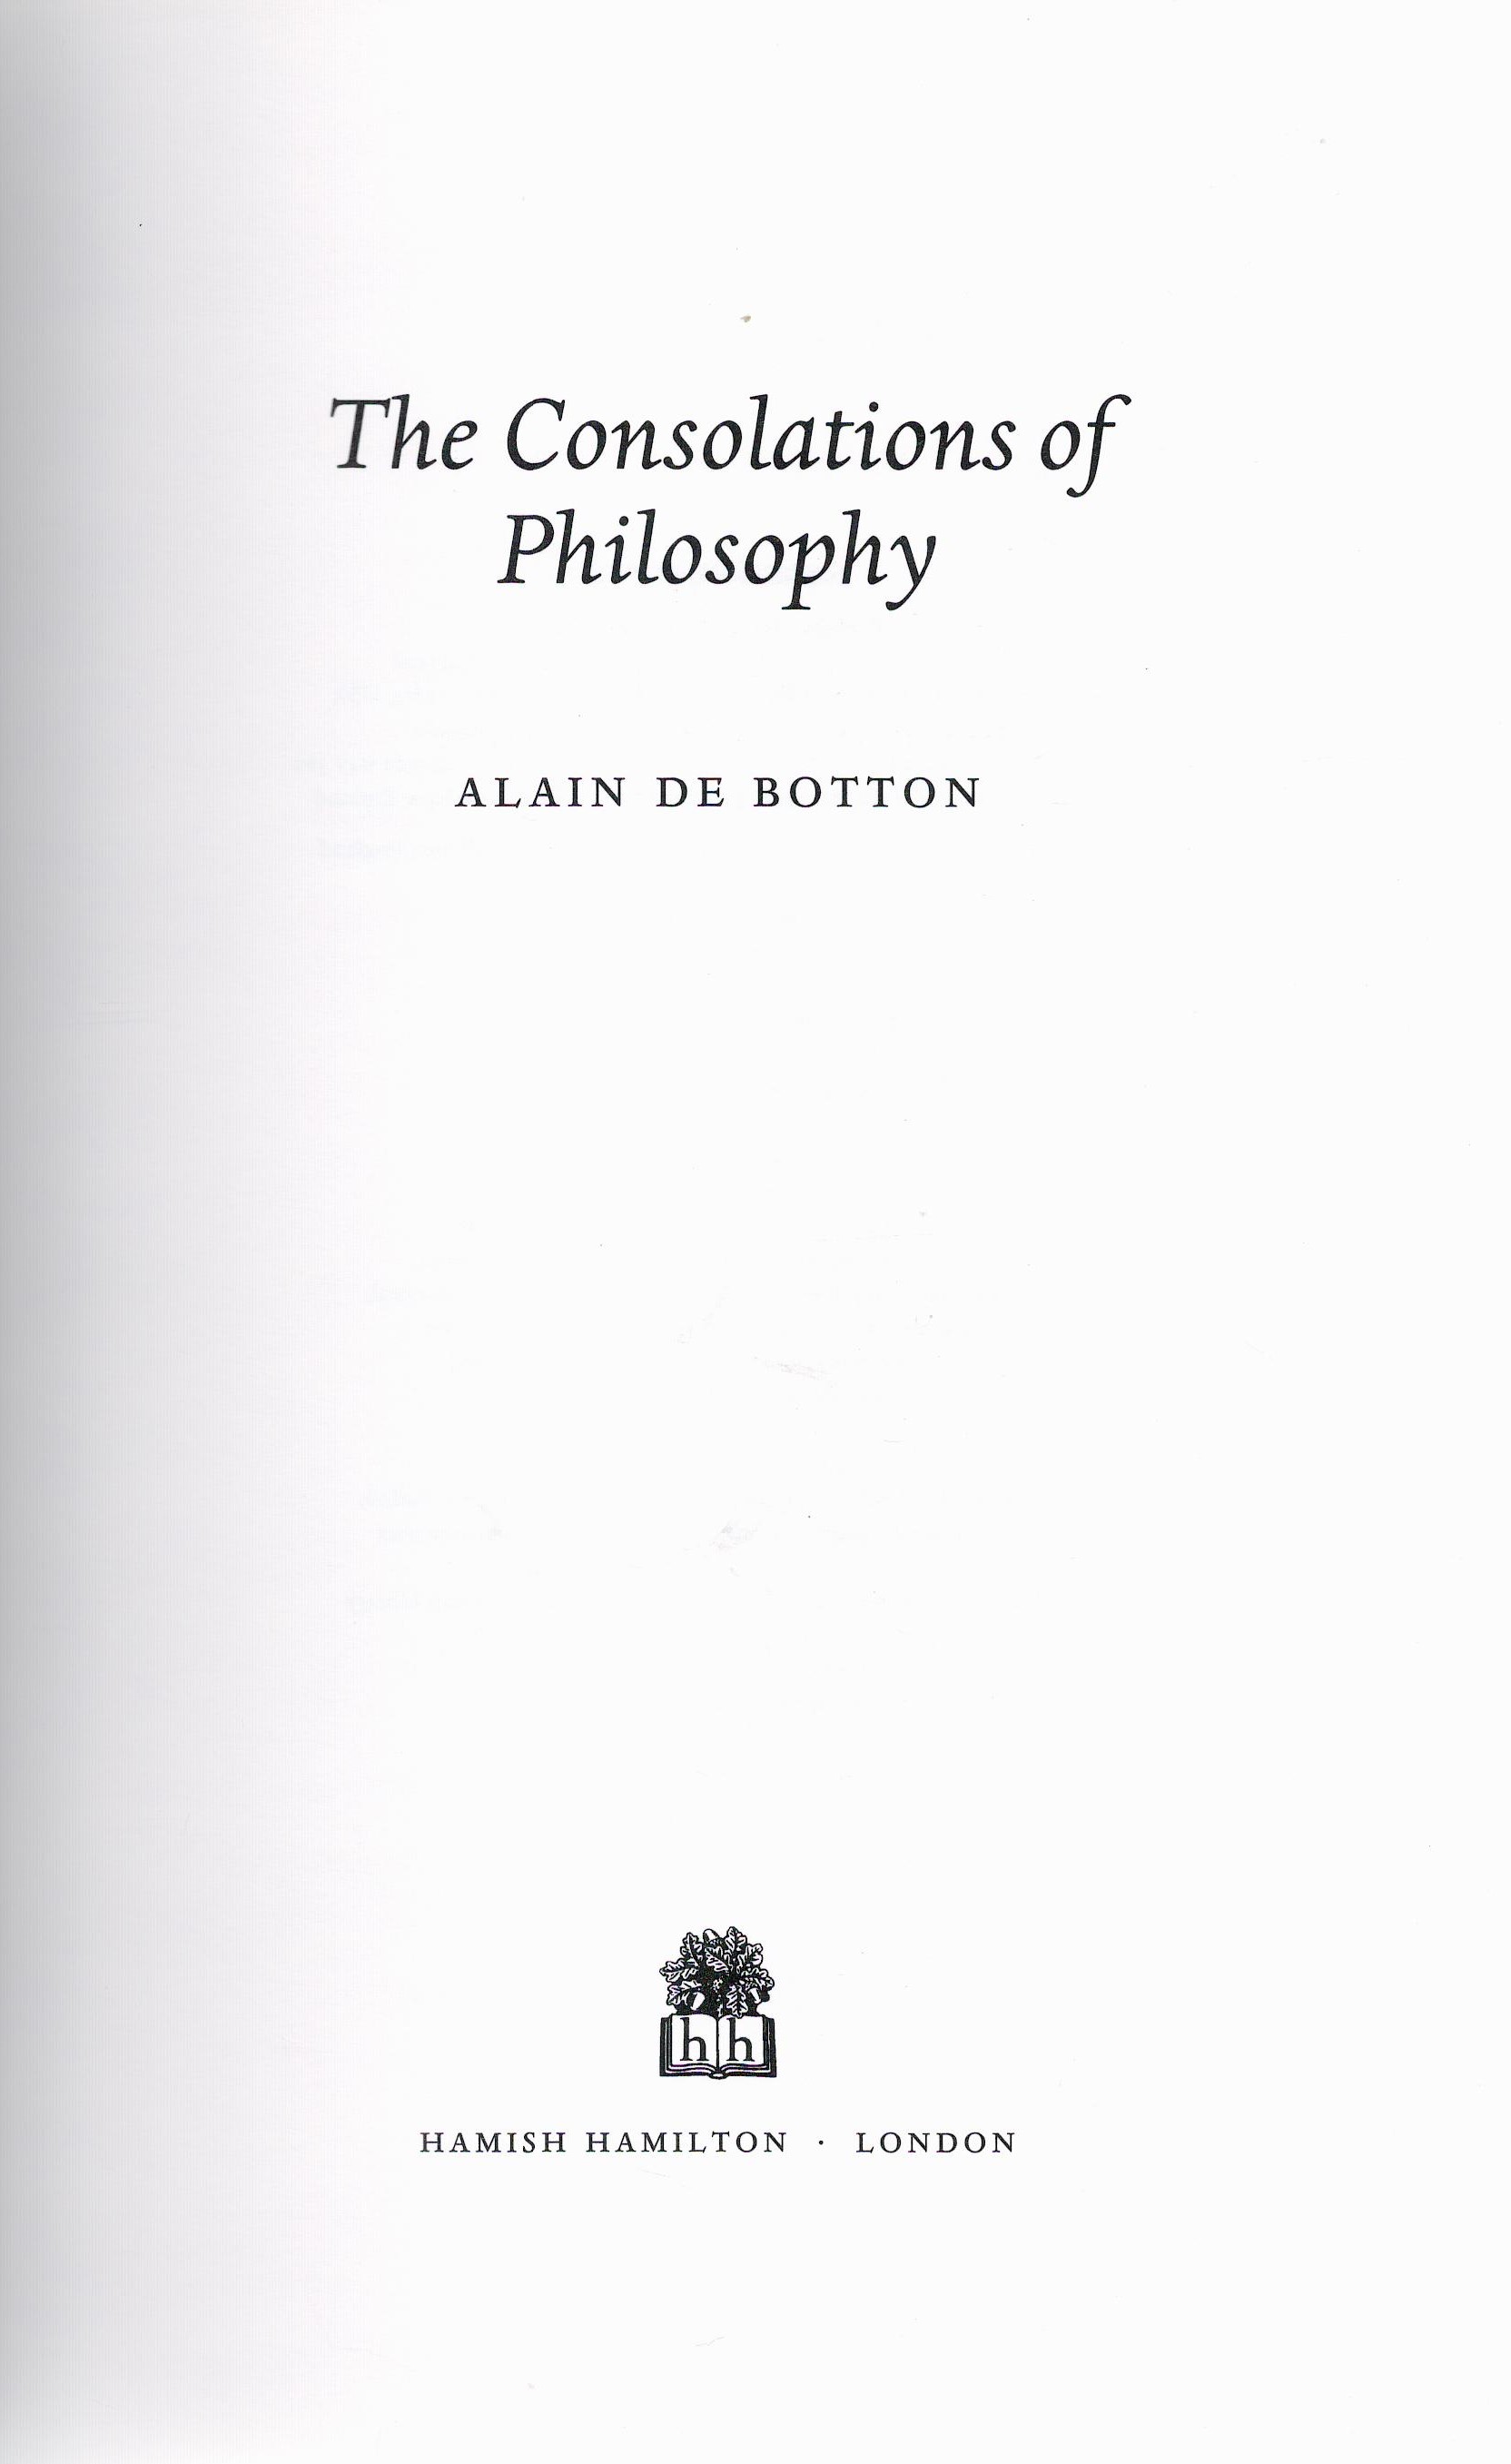 The Consolations of Philosophy by Alain De Botton Hardback Book 2000 First Edition published by - Image 2 of 3